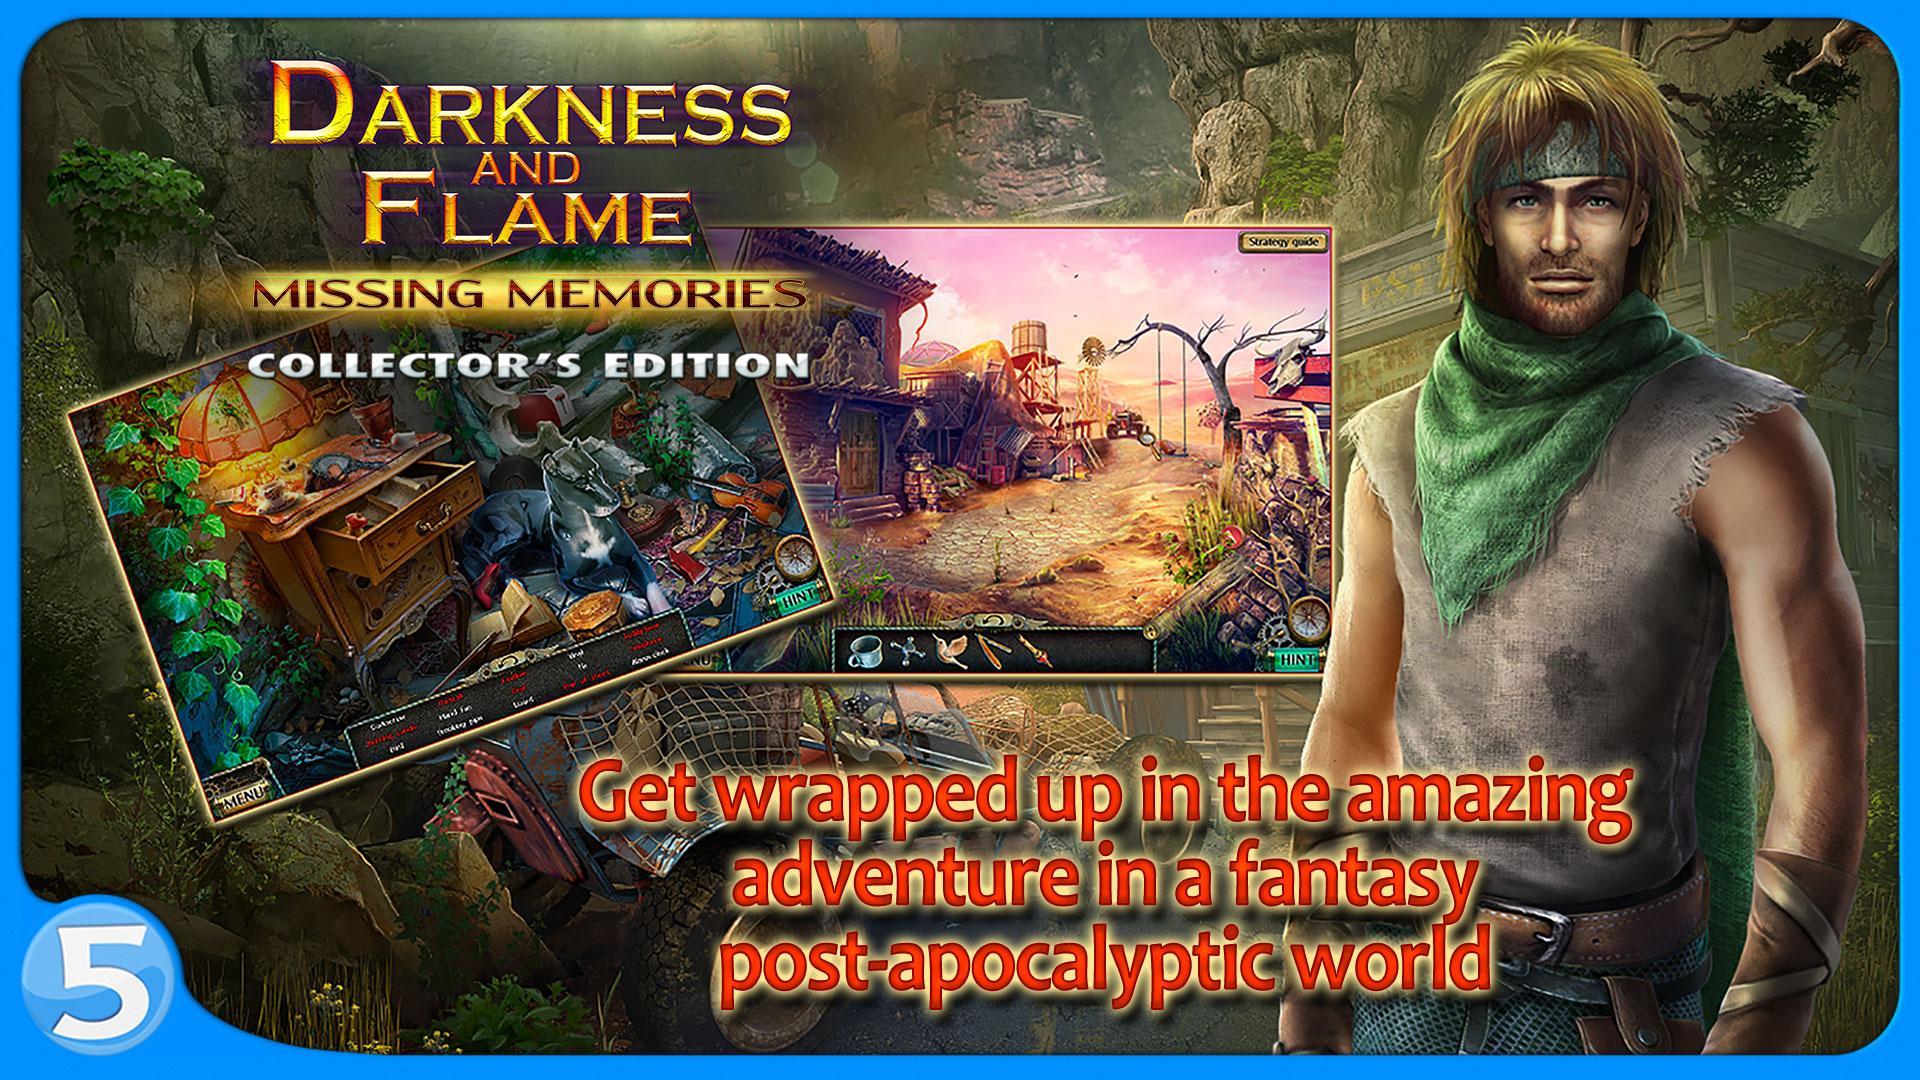 Darkness And Flame 2 For Android Apk Download - flaming adventures roblox